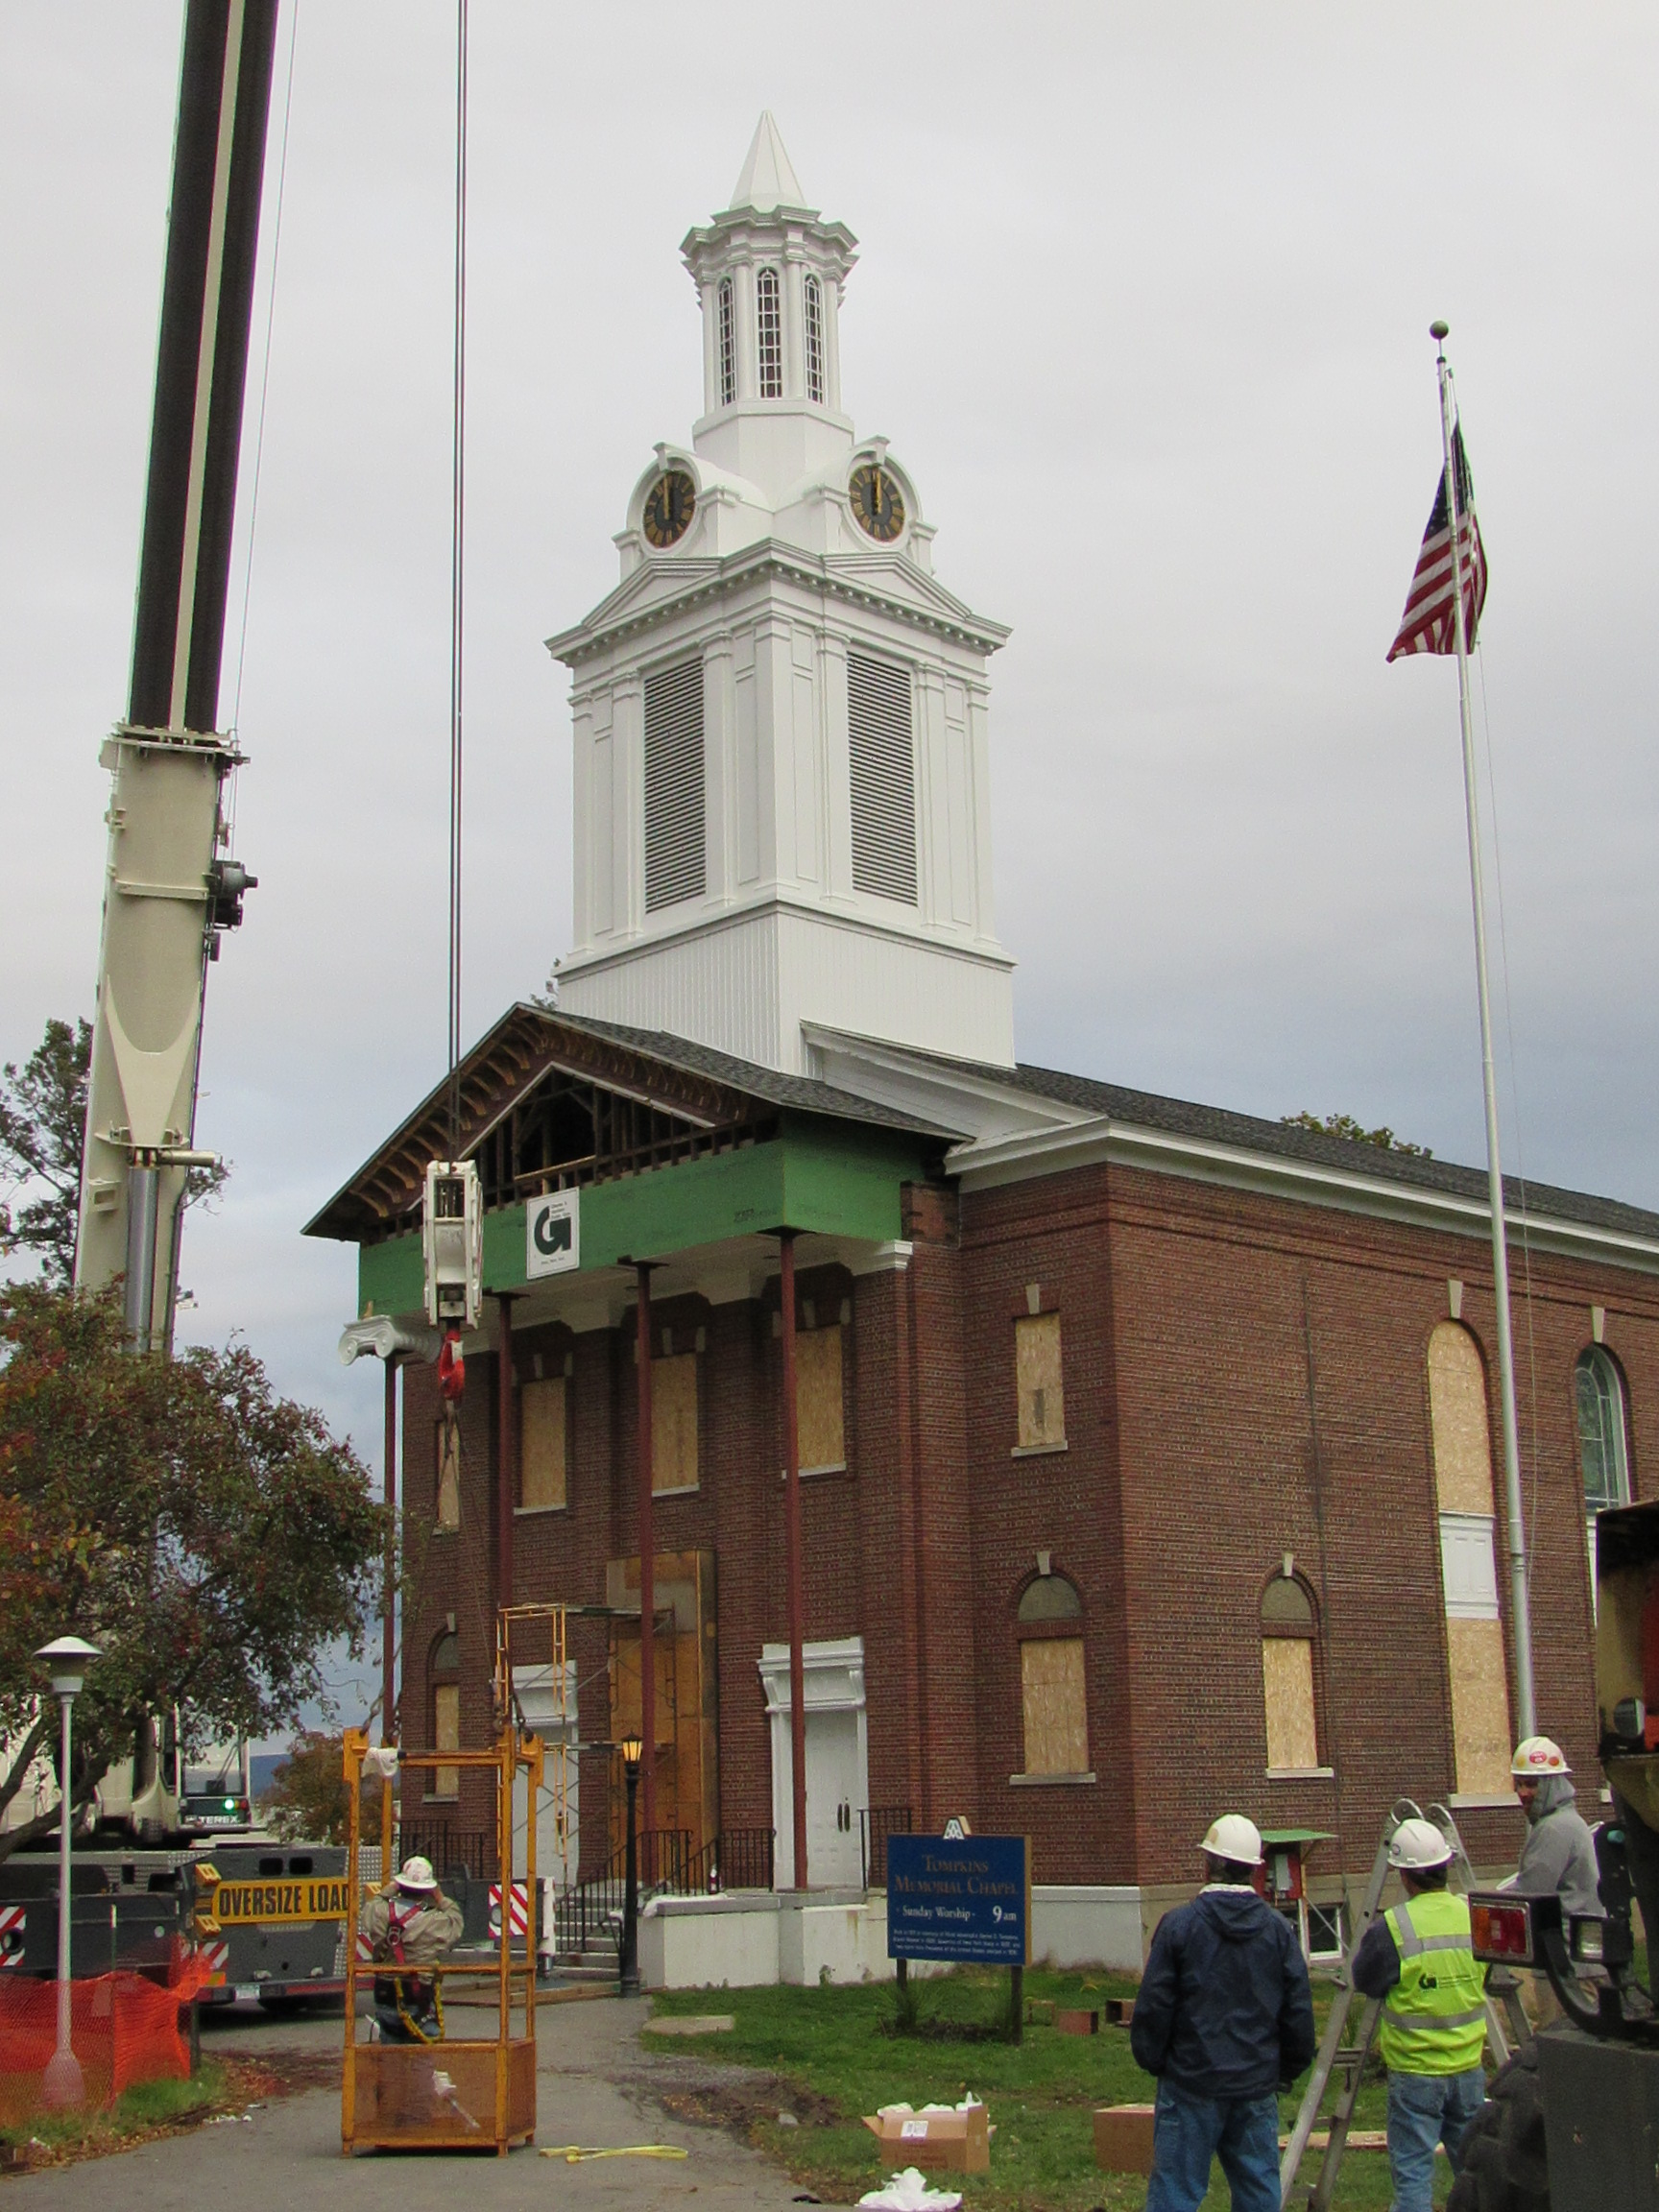 Historic Church Bells Restored with New Steeple, Clock Tower, Carillon and Electronic Bell Ringing Equipment